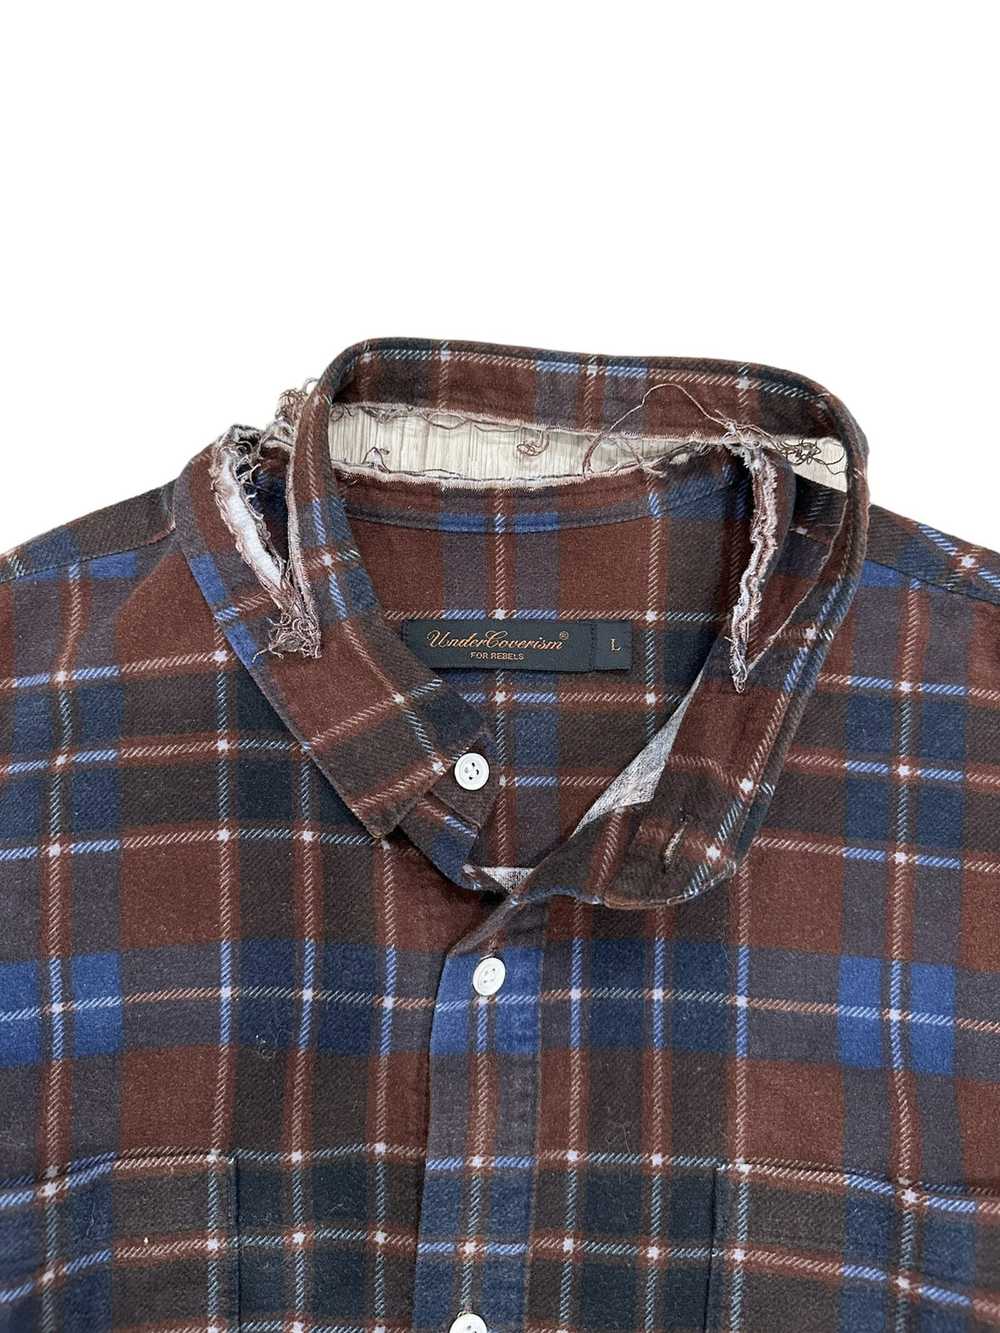 Undercover Undercover Scab Flannel - image 2